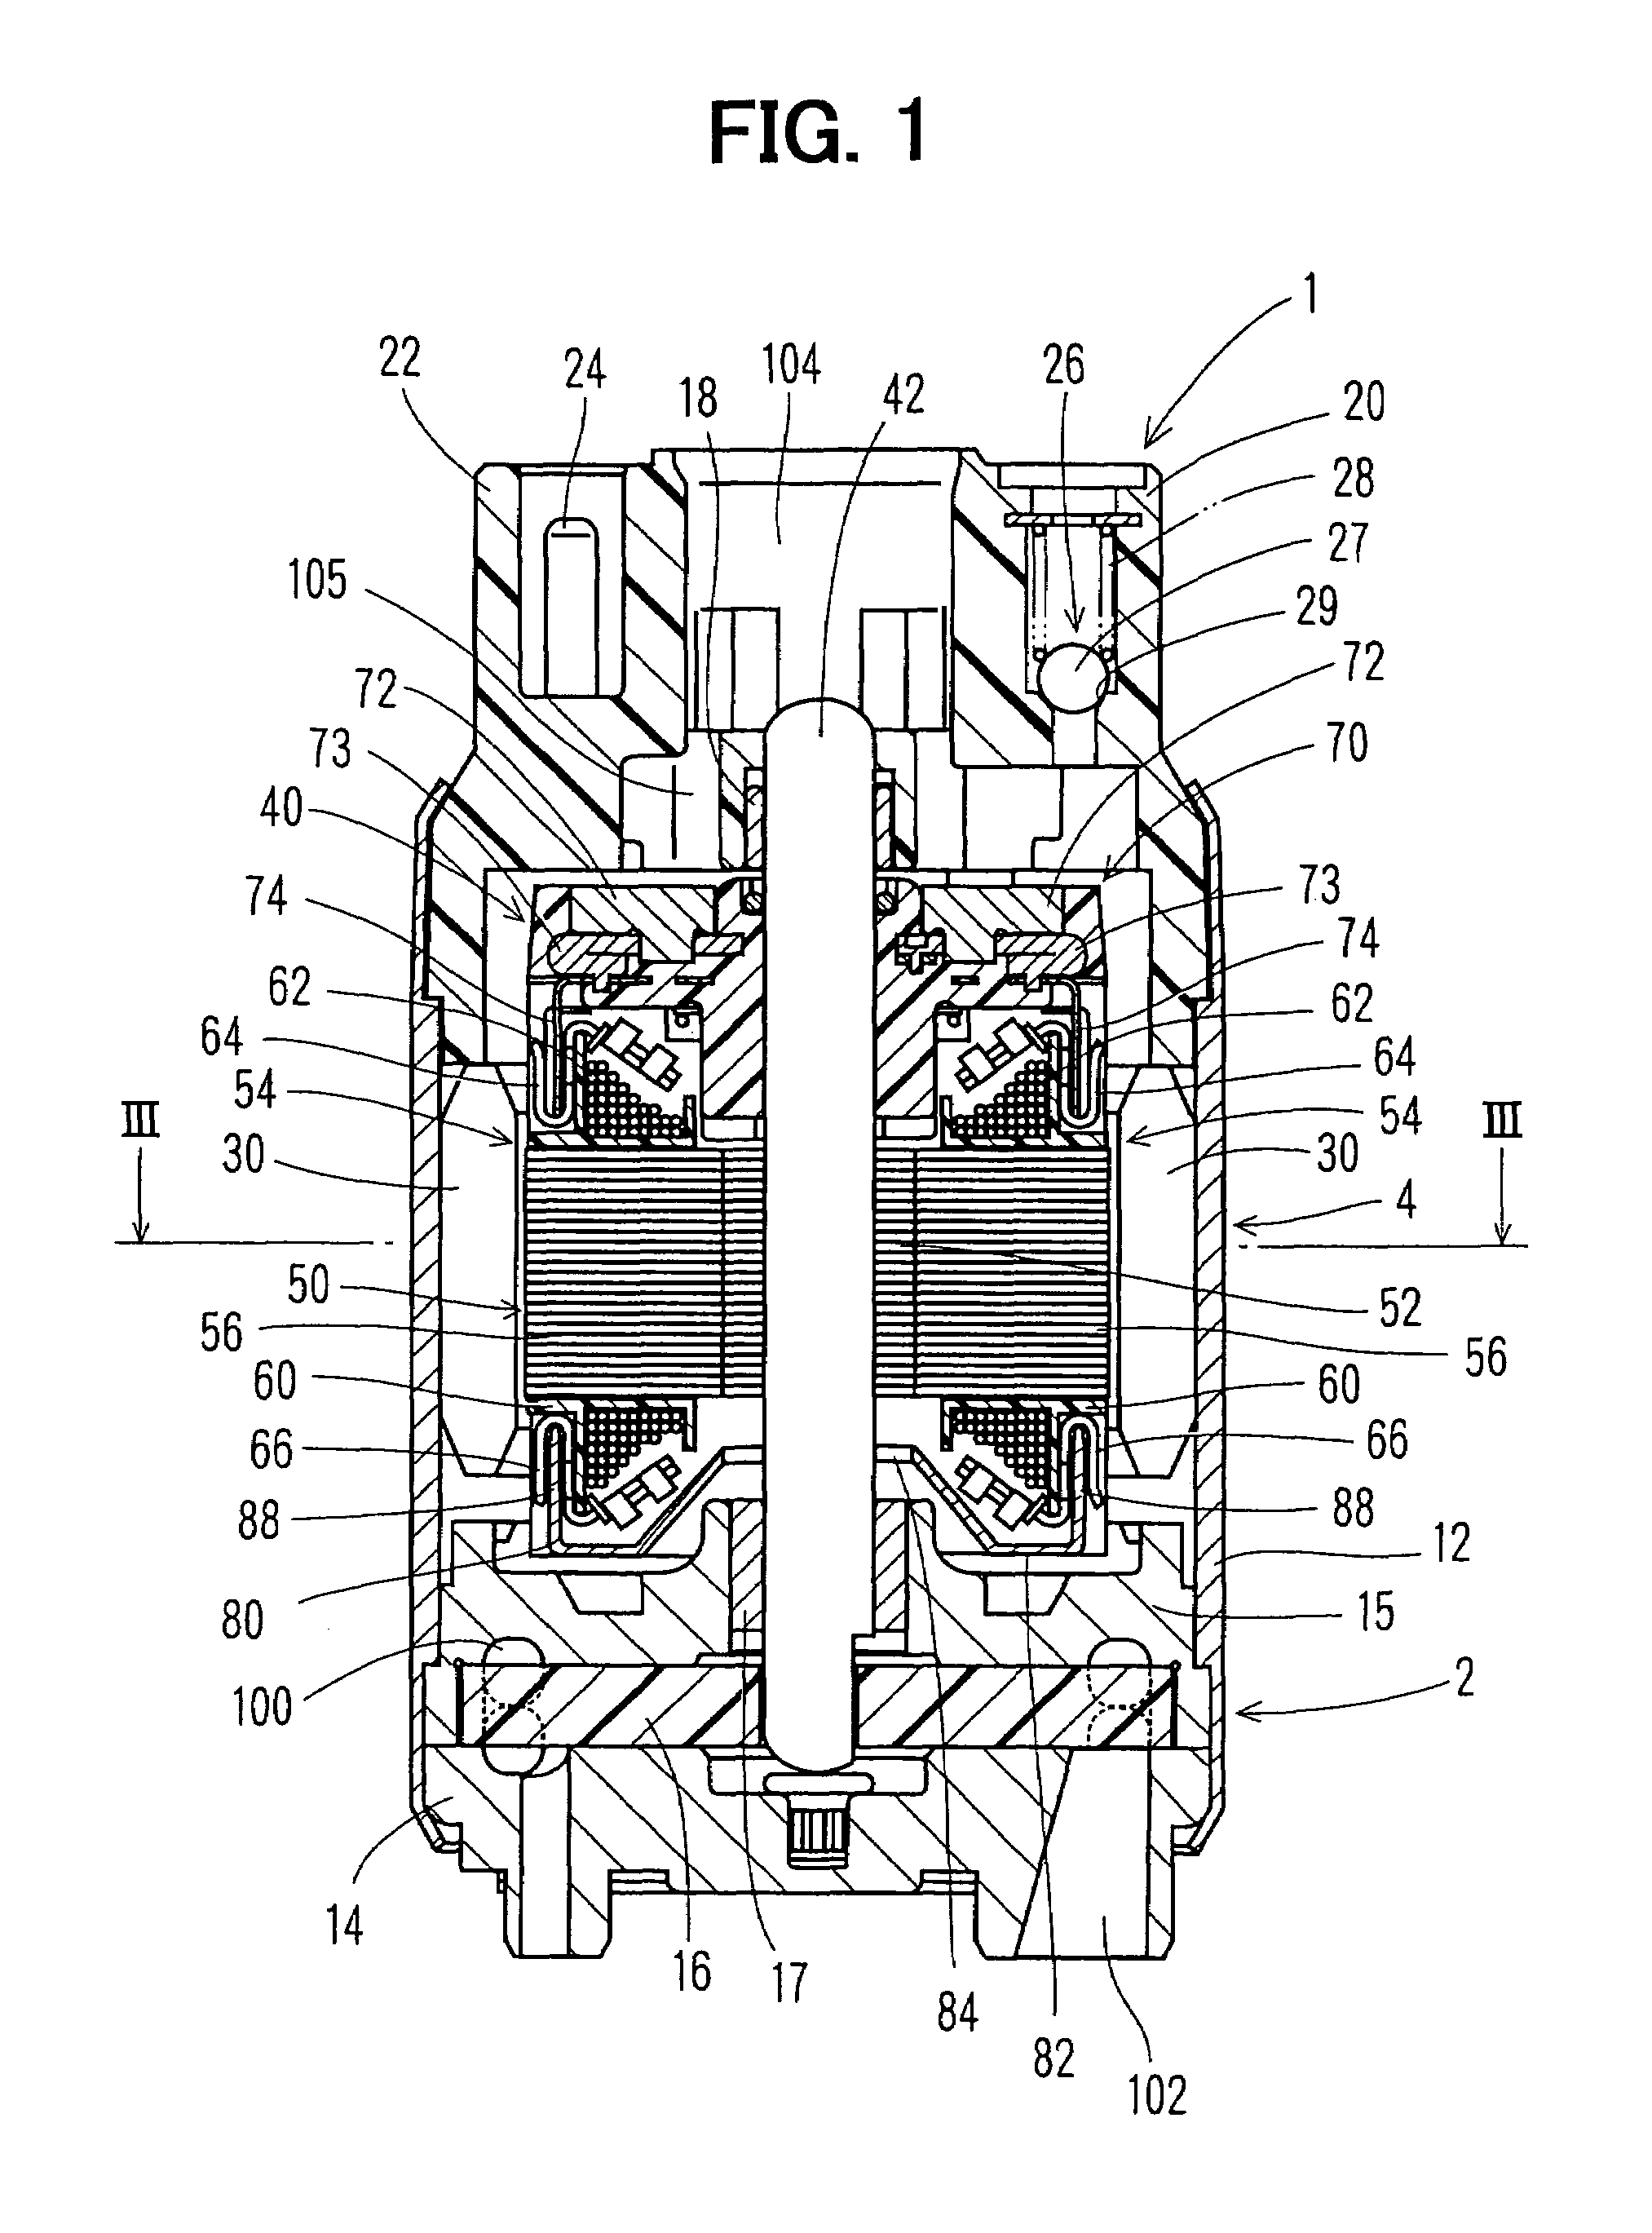 Electrical motor and fluid pump using the same